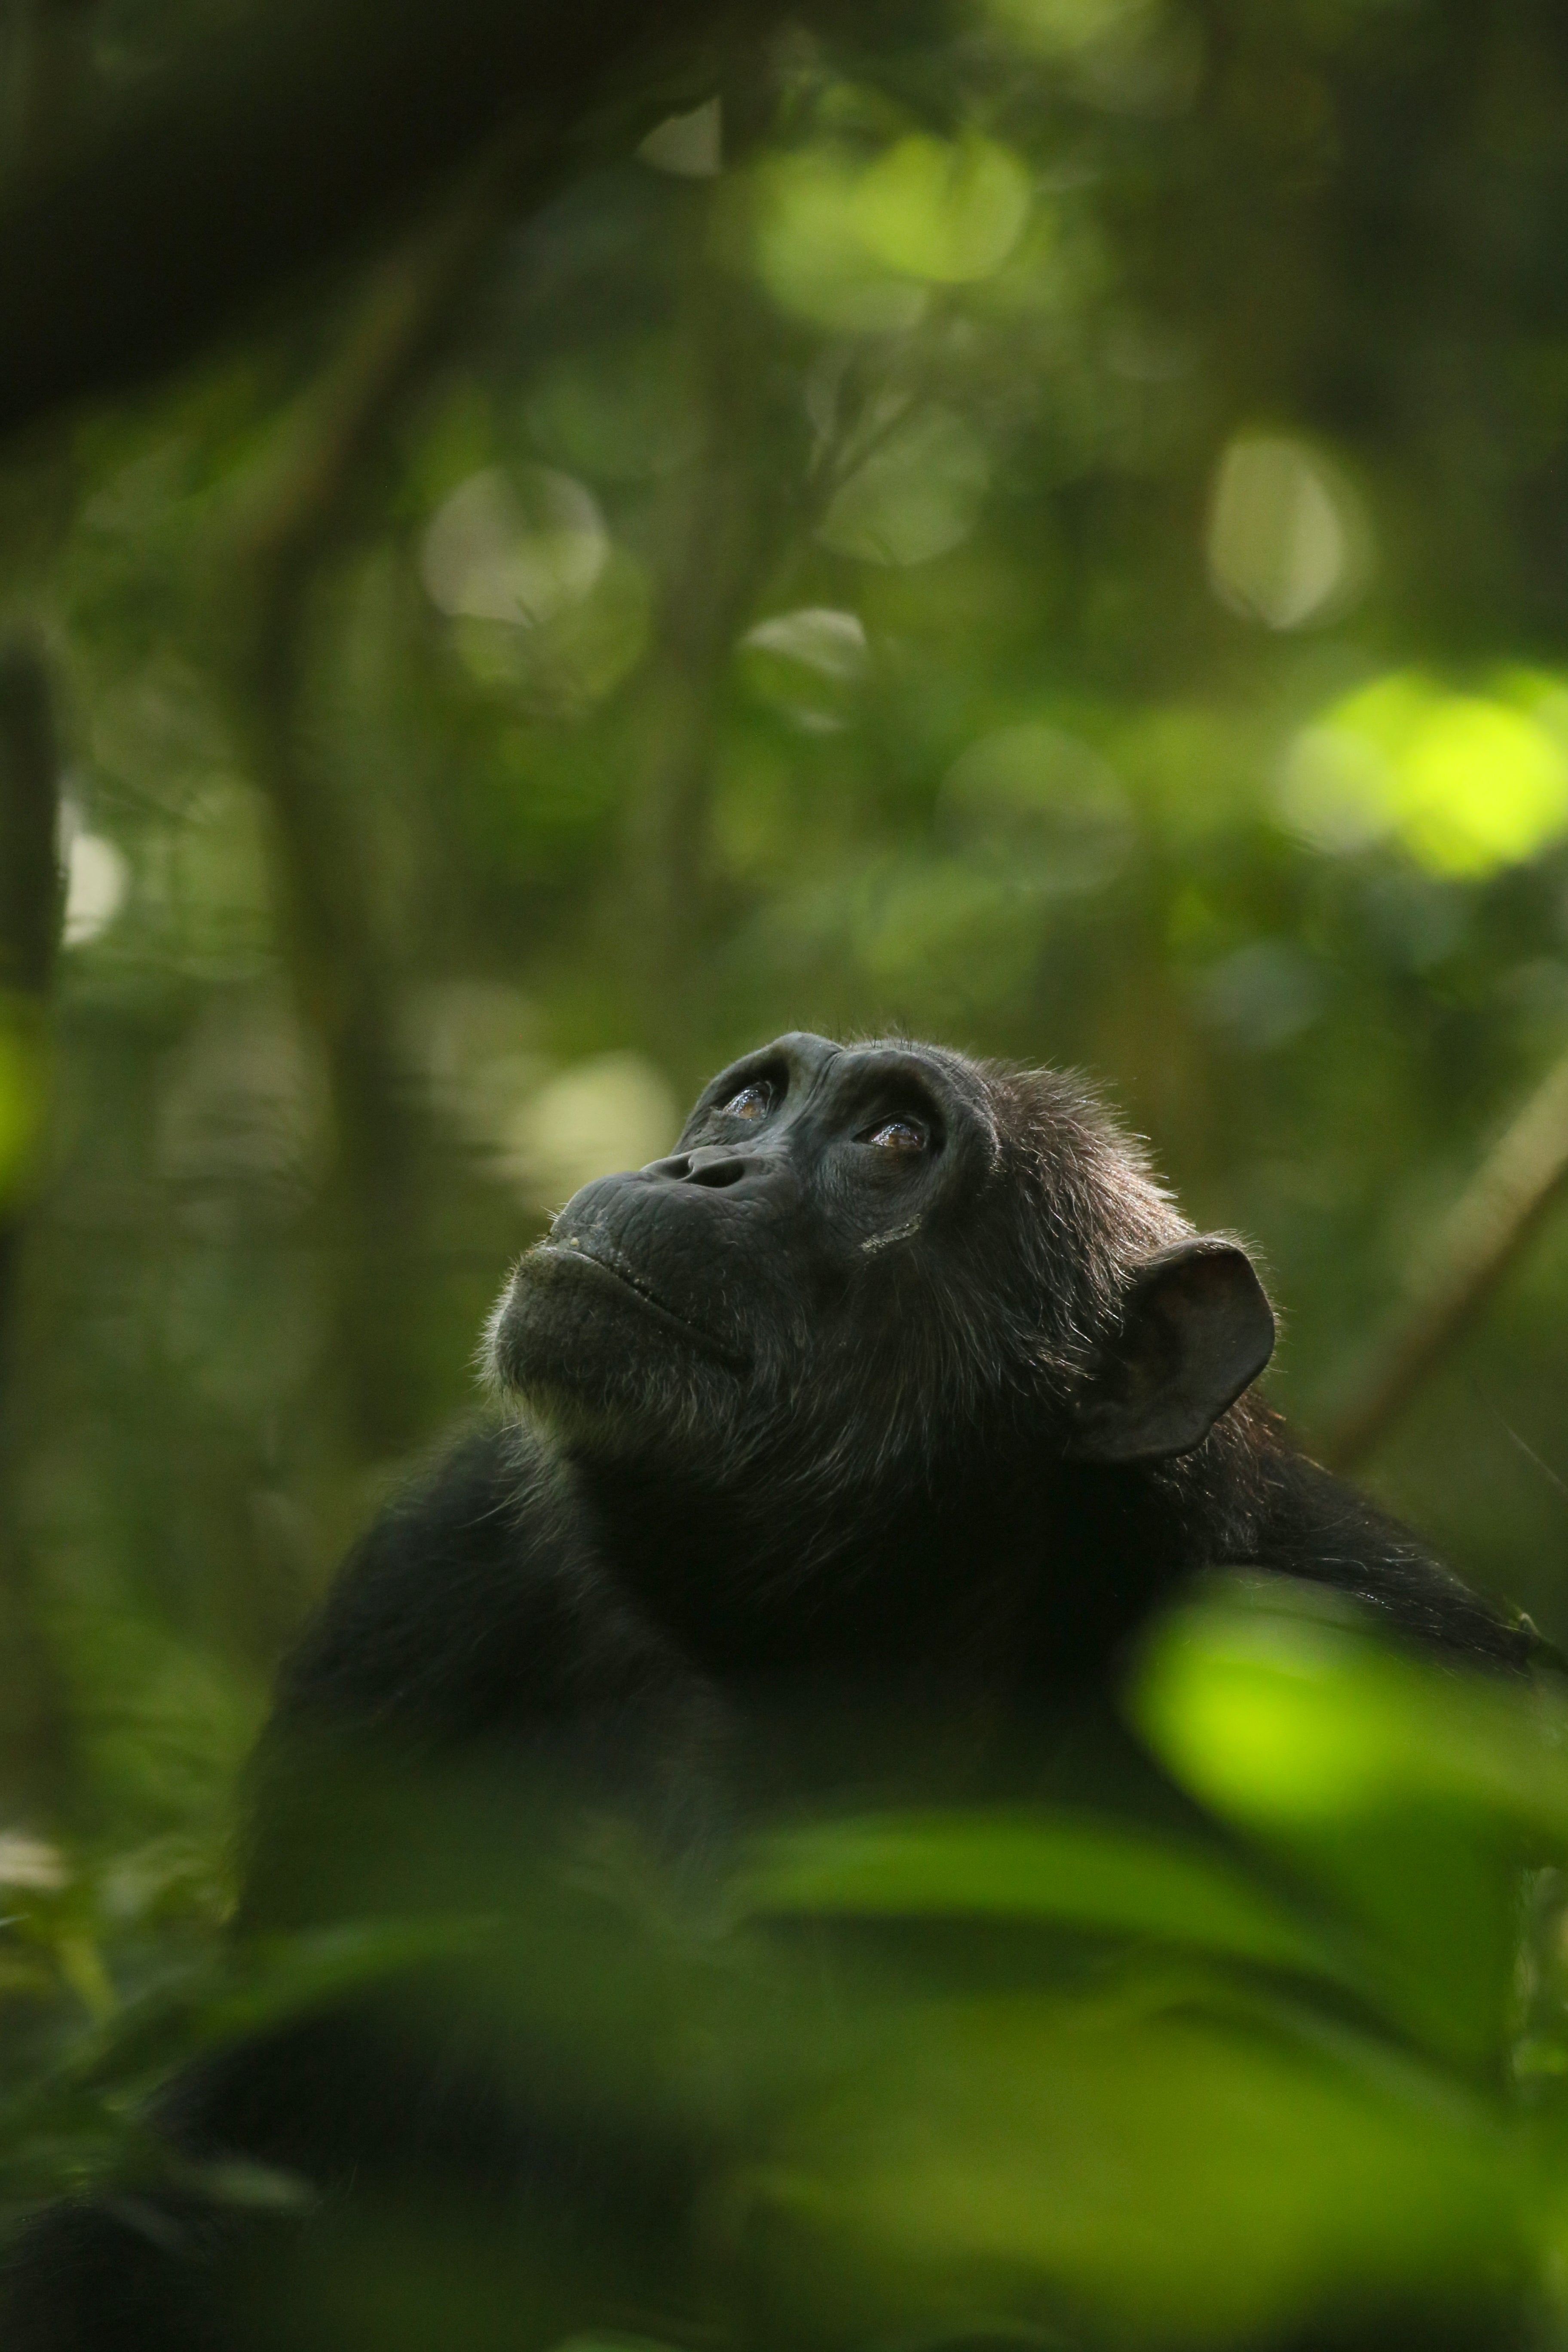 Image of a chimpanzee looking up in a tree.